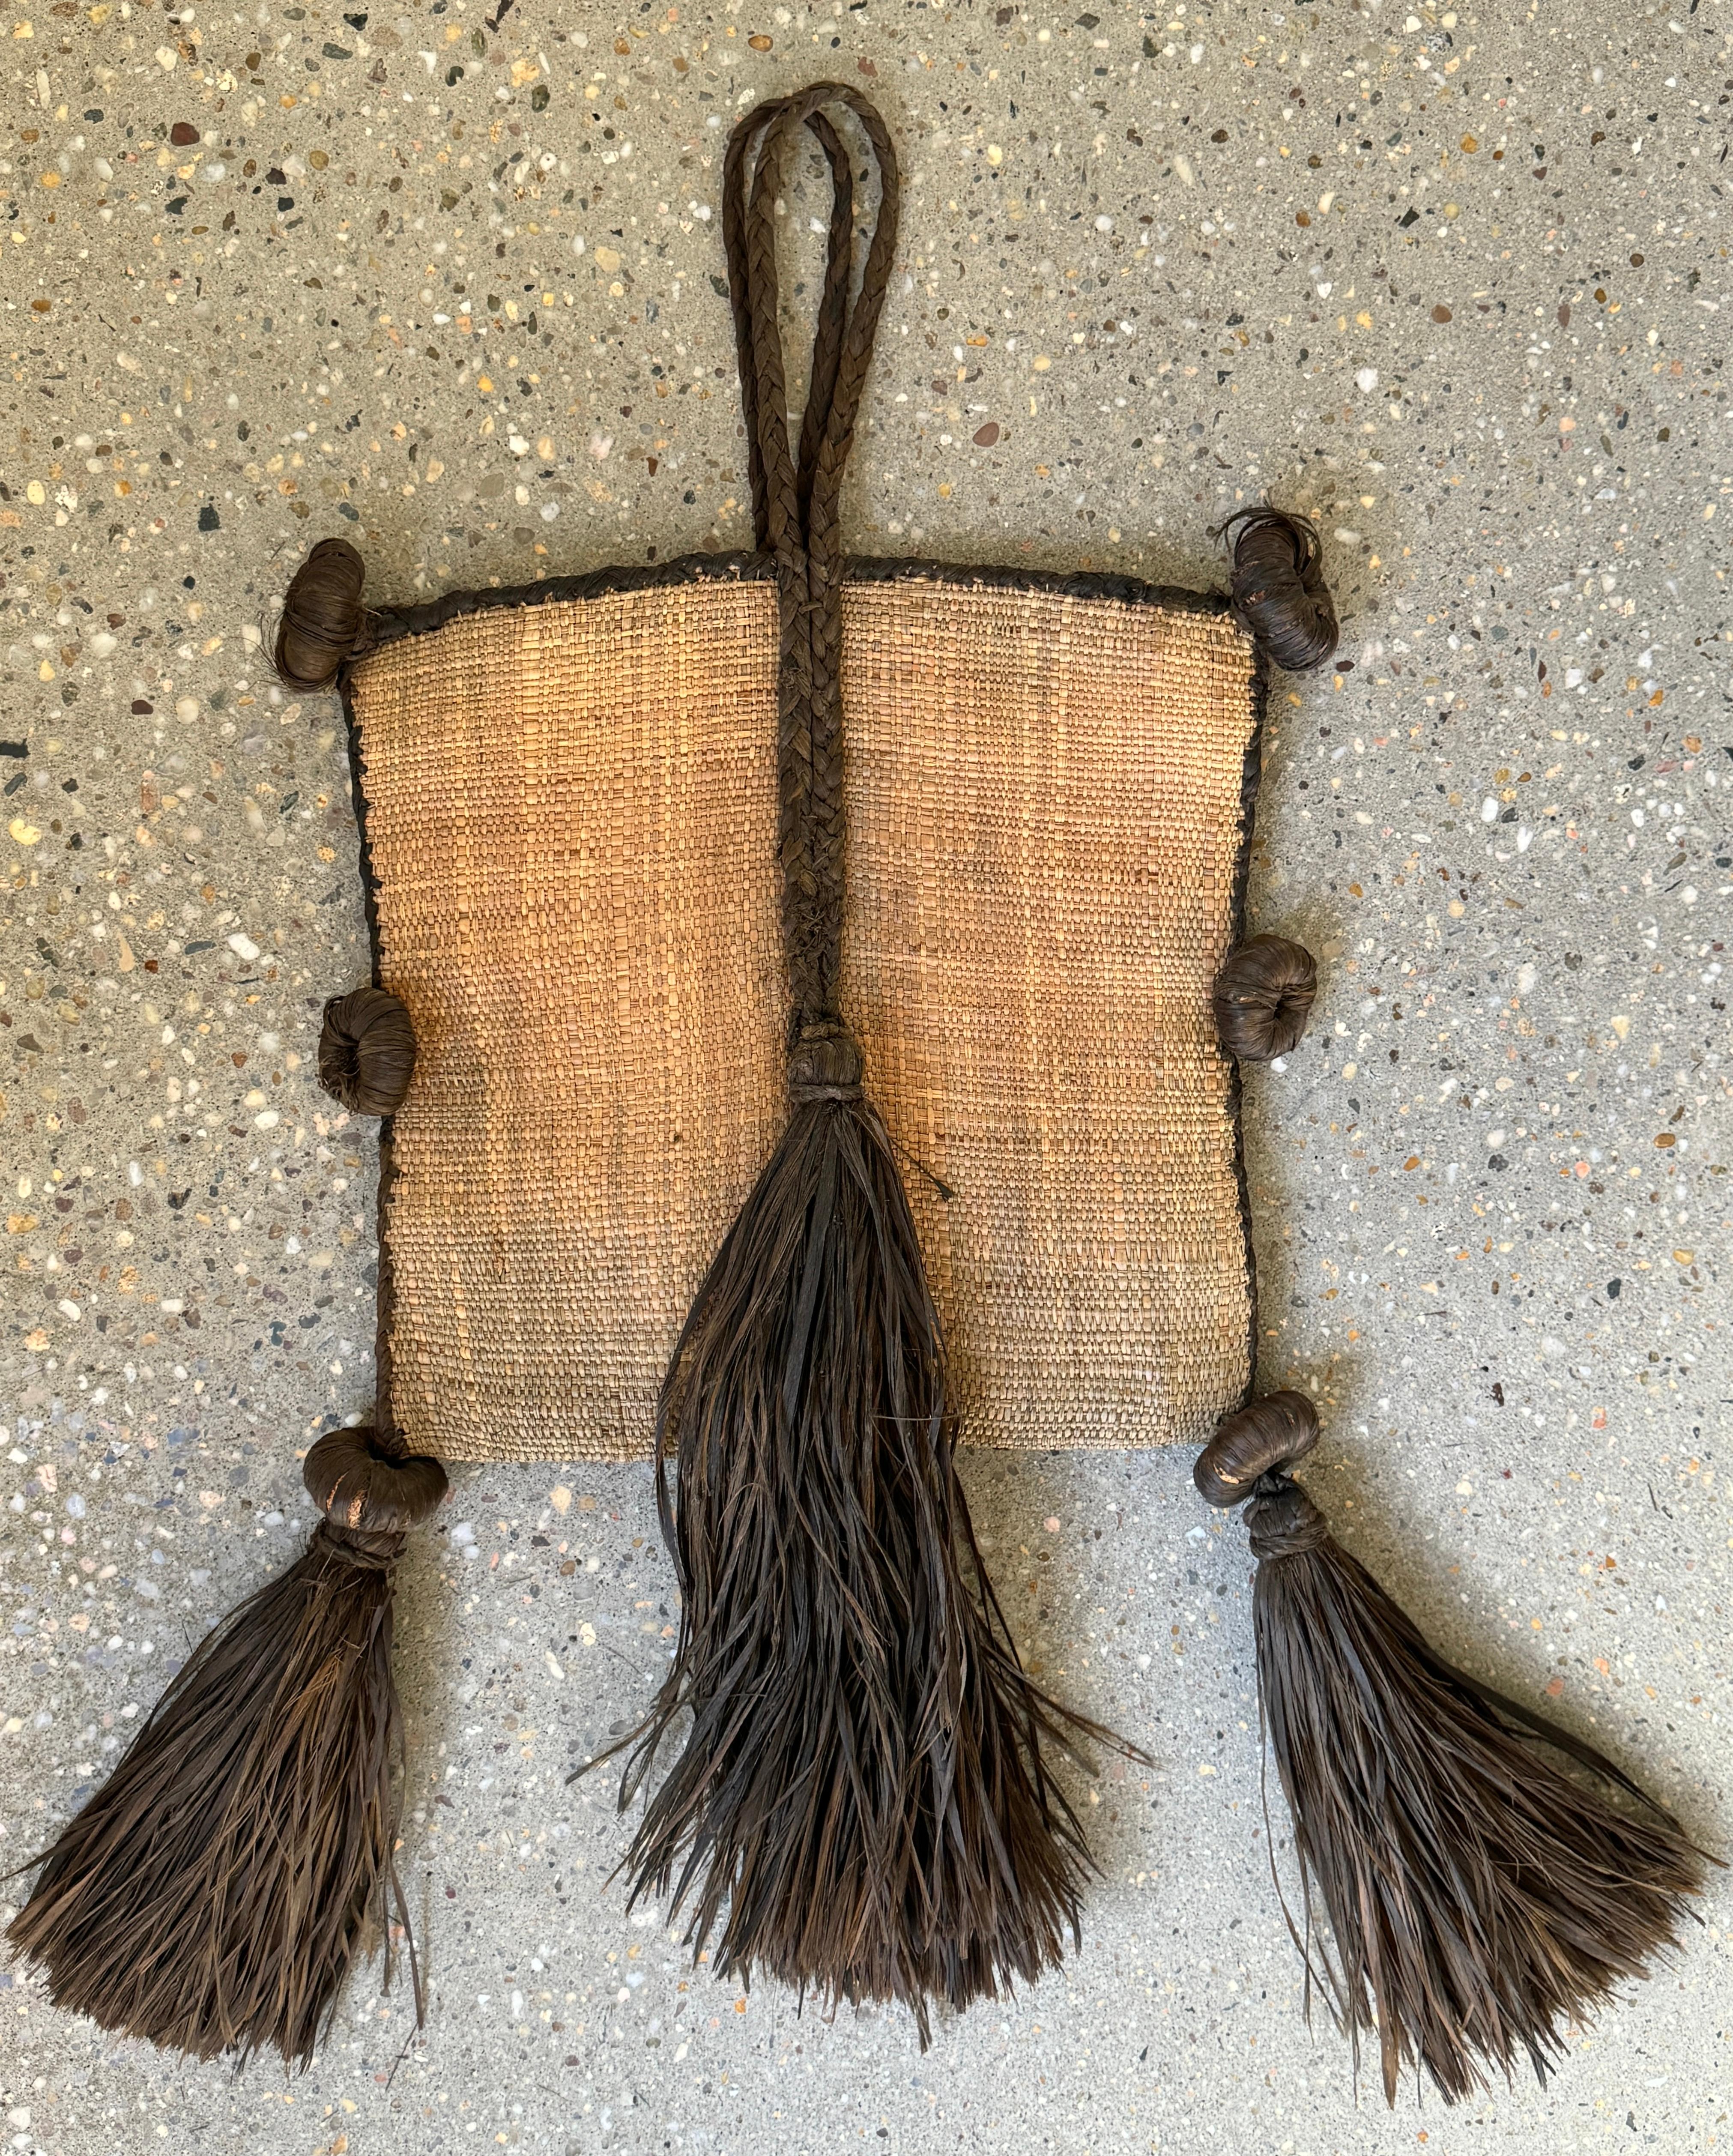 Shaman body bags from the early 20th century were sacred and significant artifacts used in certain cultural practices and rituals among various indigenous communities and shamans in different parts of the world.

These body bags or pouches were